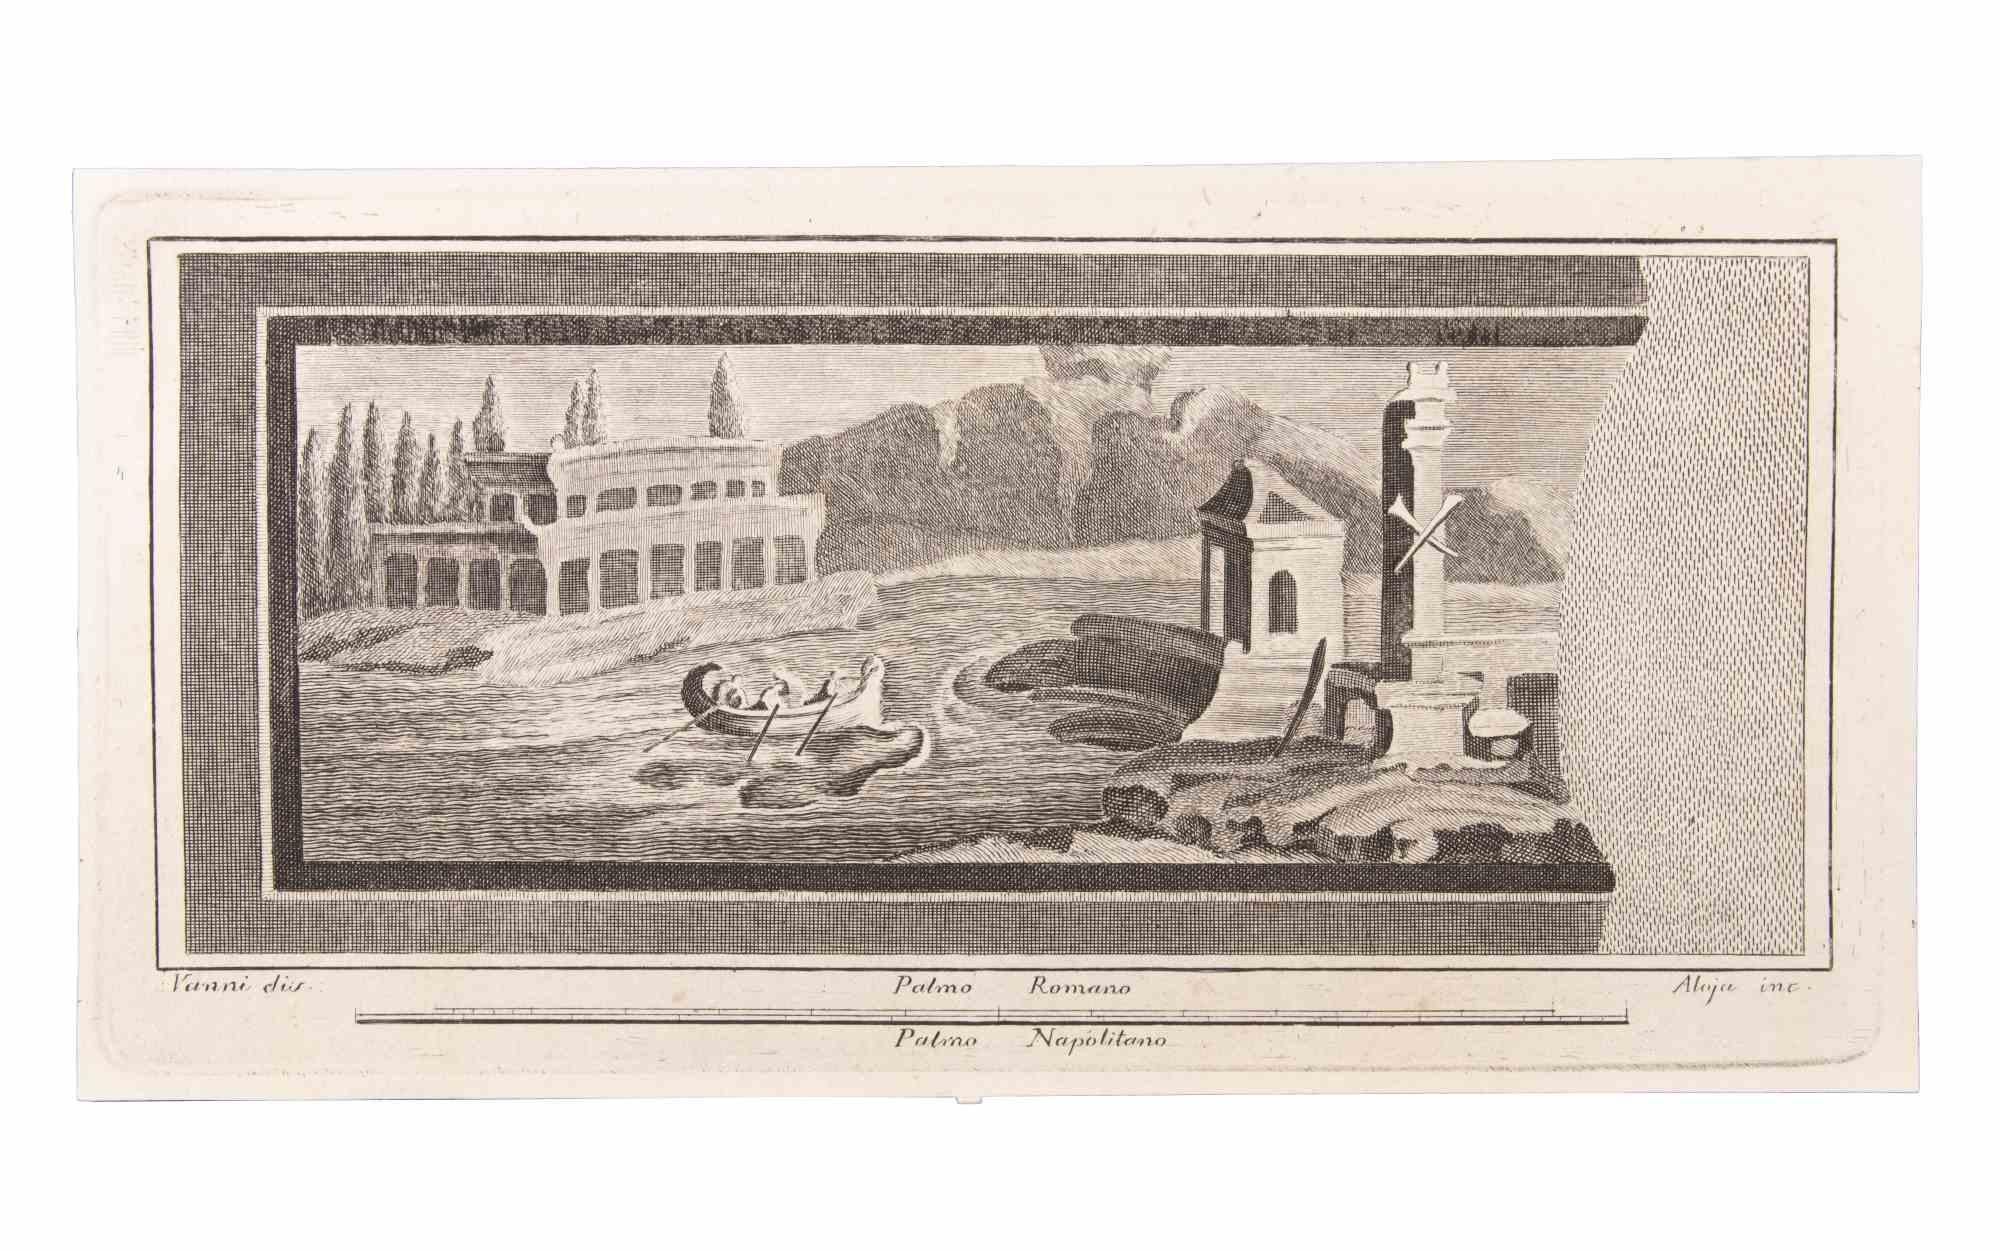 Seascape is an Etching realized by  Vincenzo Aloja (1768-1817).

The etching belongs to the print suite “Antiquities of Herculaneum Exposed” (original title: “Le Antichità di Ercolano Esposte”), an eight-volume volume of engravings of the finds from